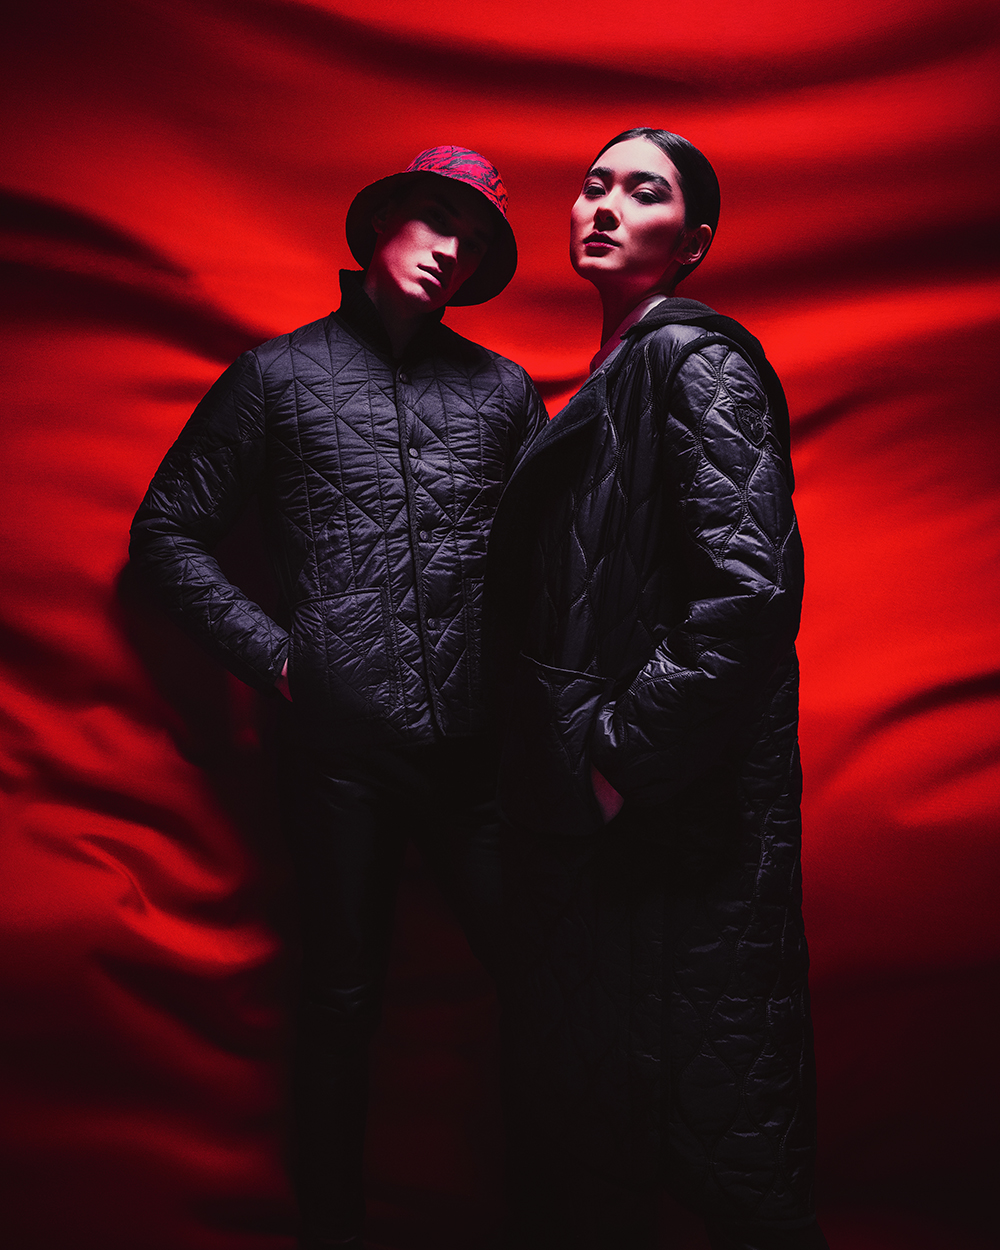 Two people in black jackets stand and look forward, against a red and black background.